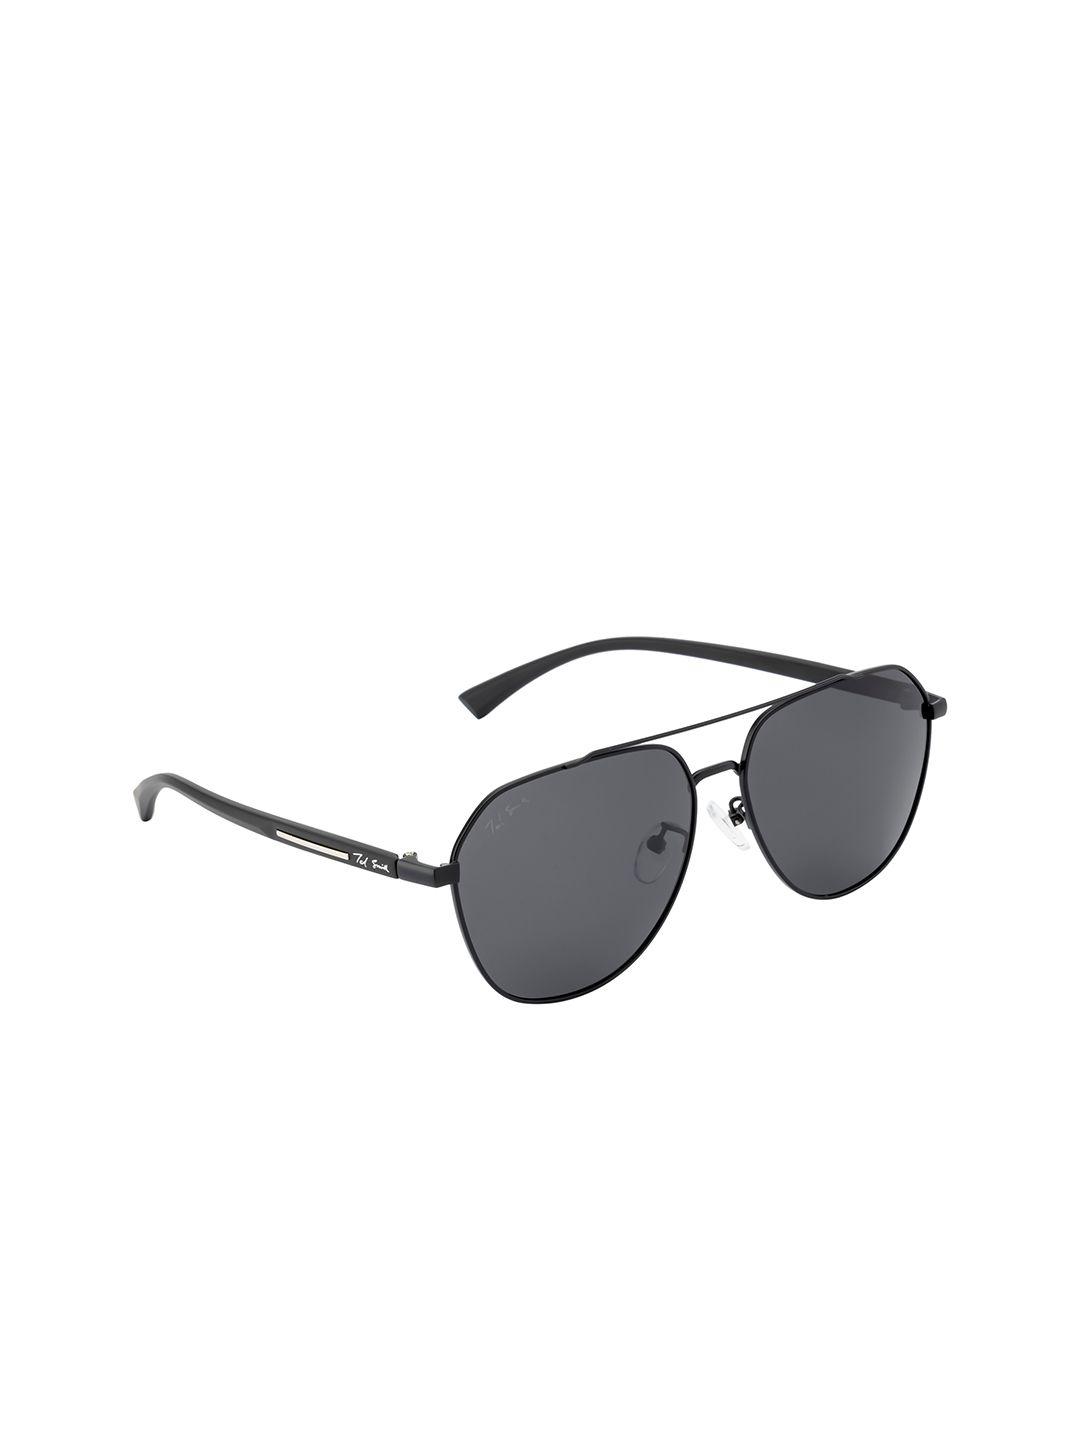 ted smith unisex lens & aviator sunglasses with polarised lens tss-1270s_blk